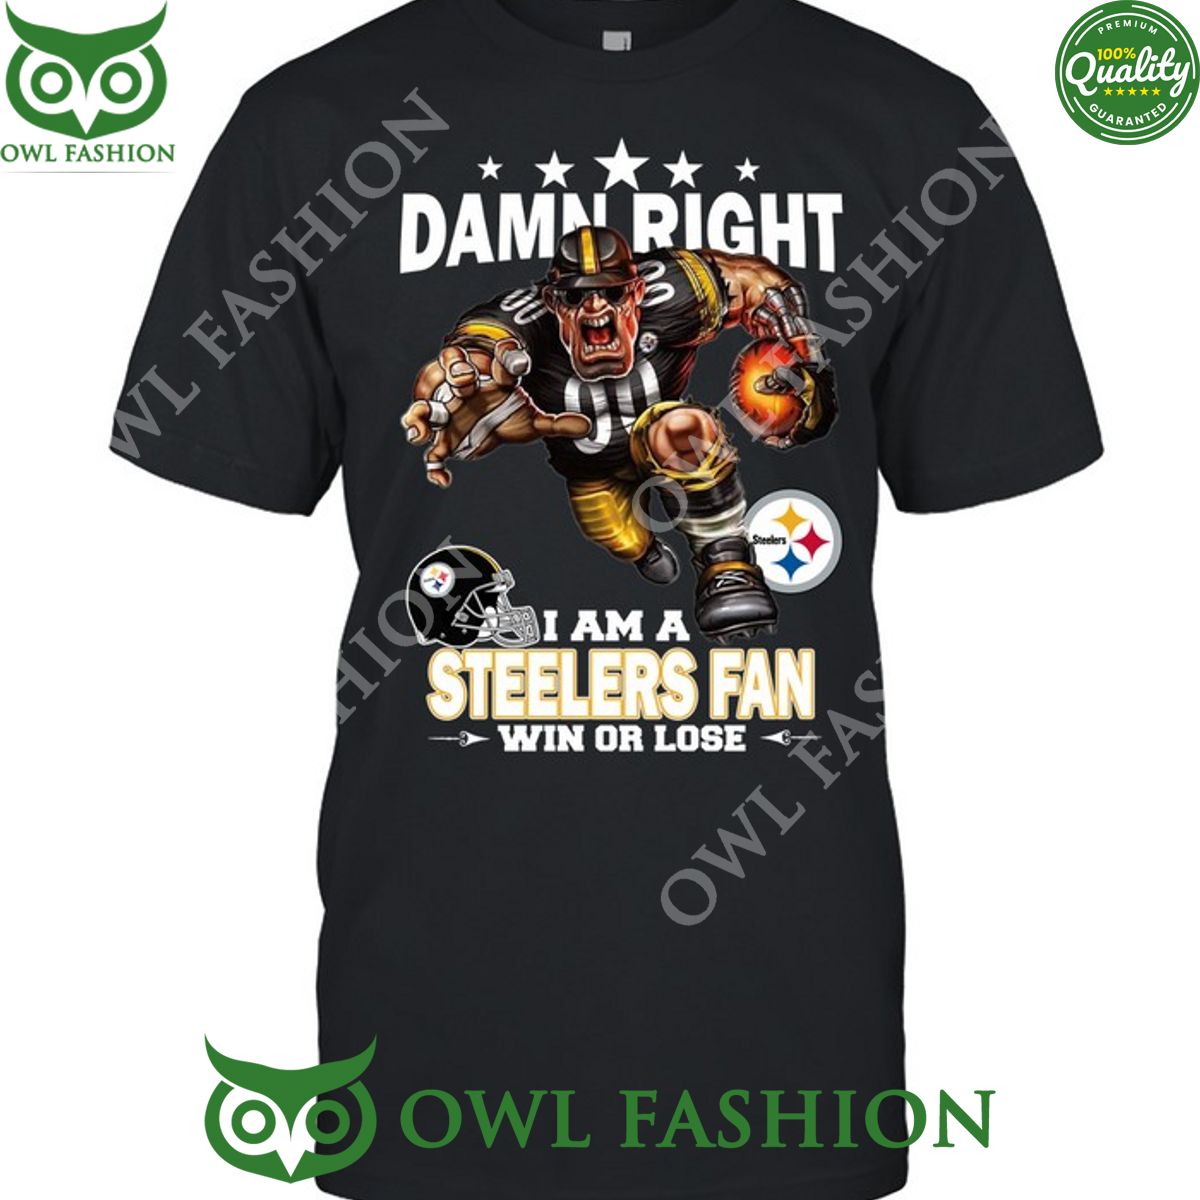 damn right pittsburgh steelers nfl fan win or lose t shirt 1 OvD9b.jpg